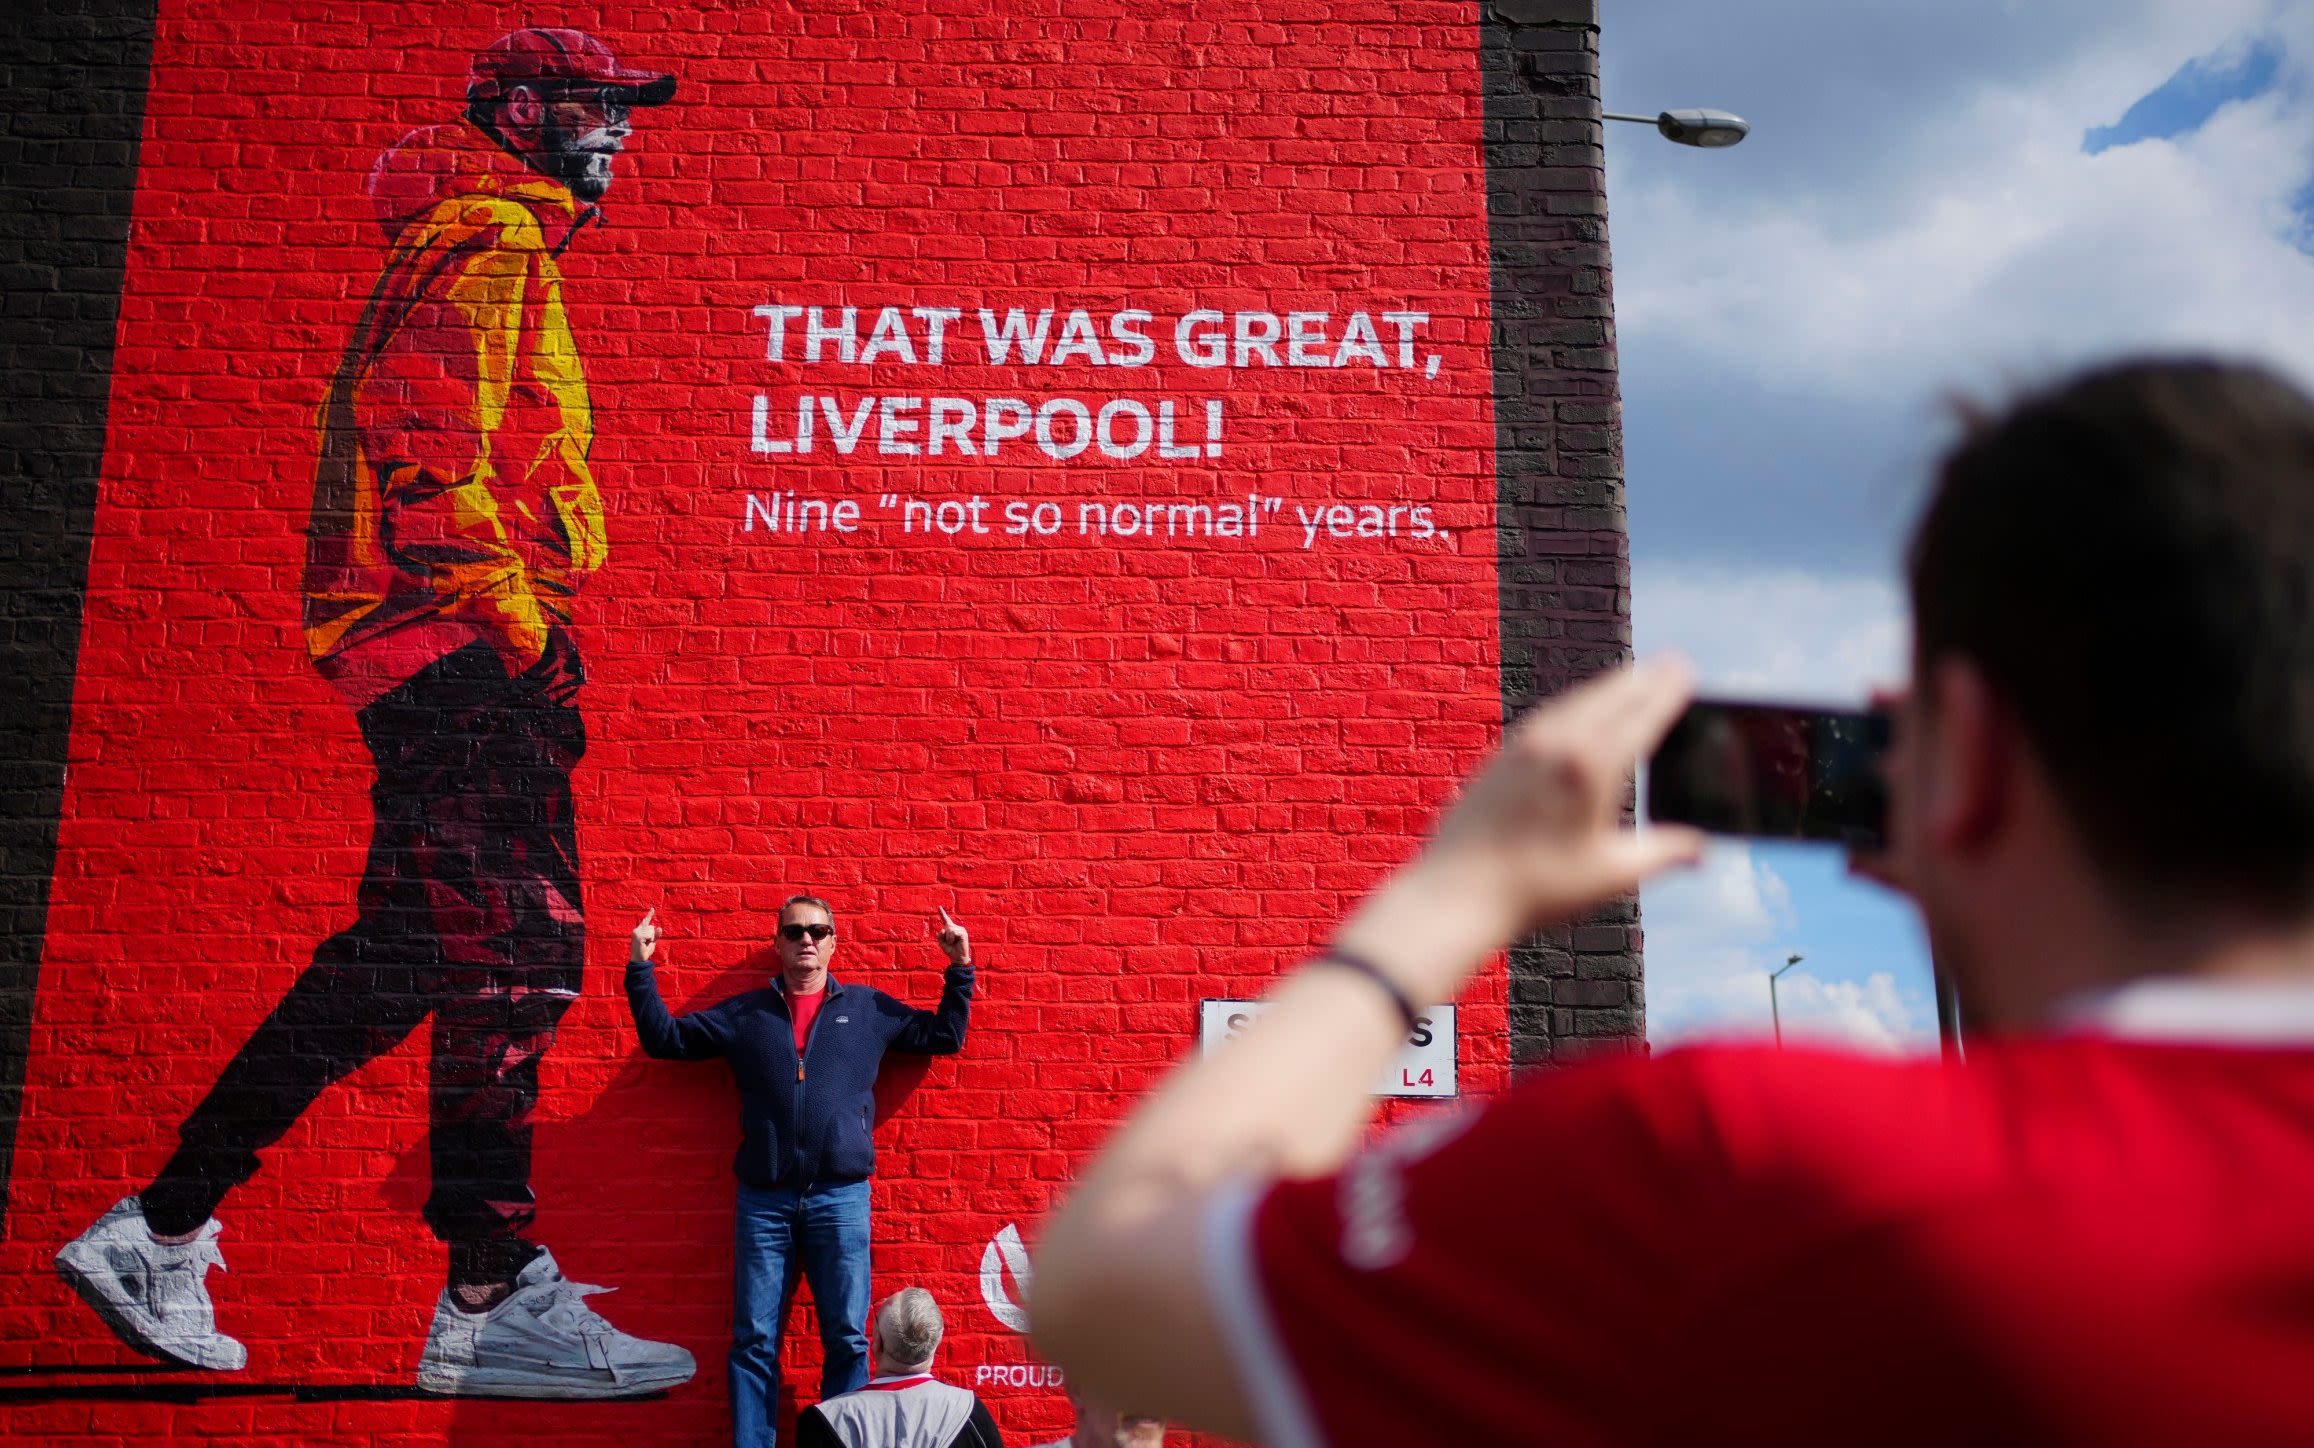 Jurgen Klopp means more to the city of Liverpool than outsiders realise